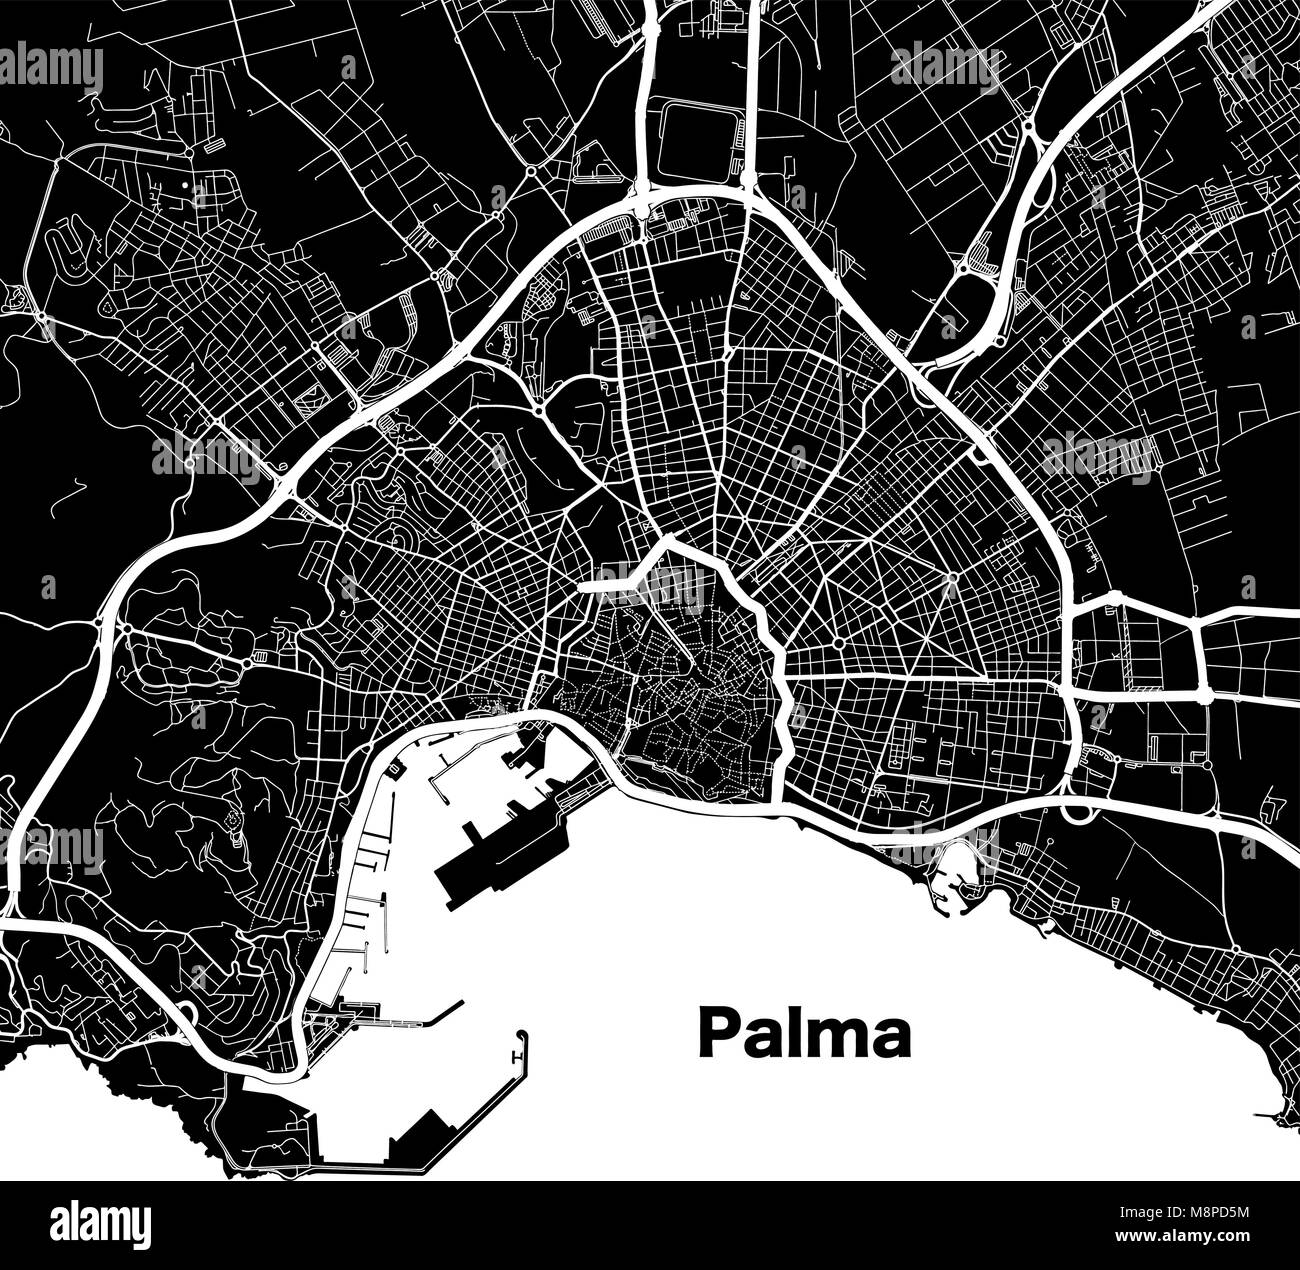 Palma de Mallorca urban vector map. White Highways and City Streets on Black Background. Stock Vector